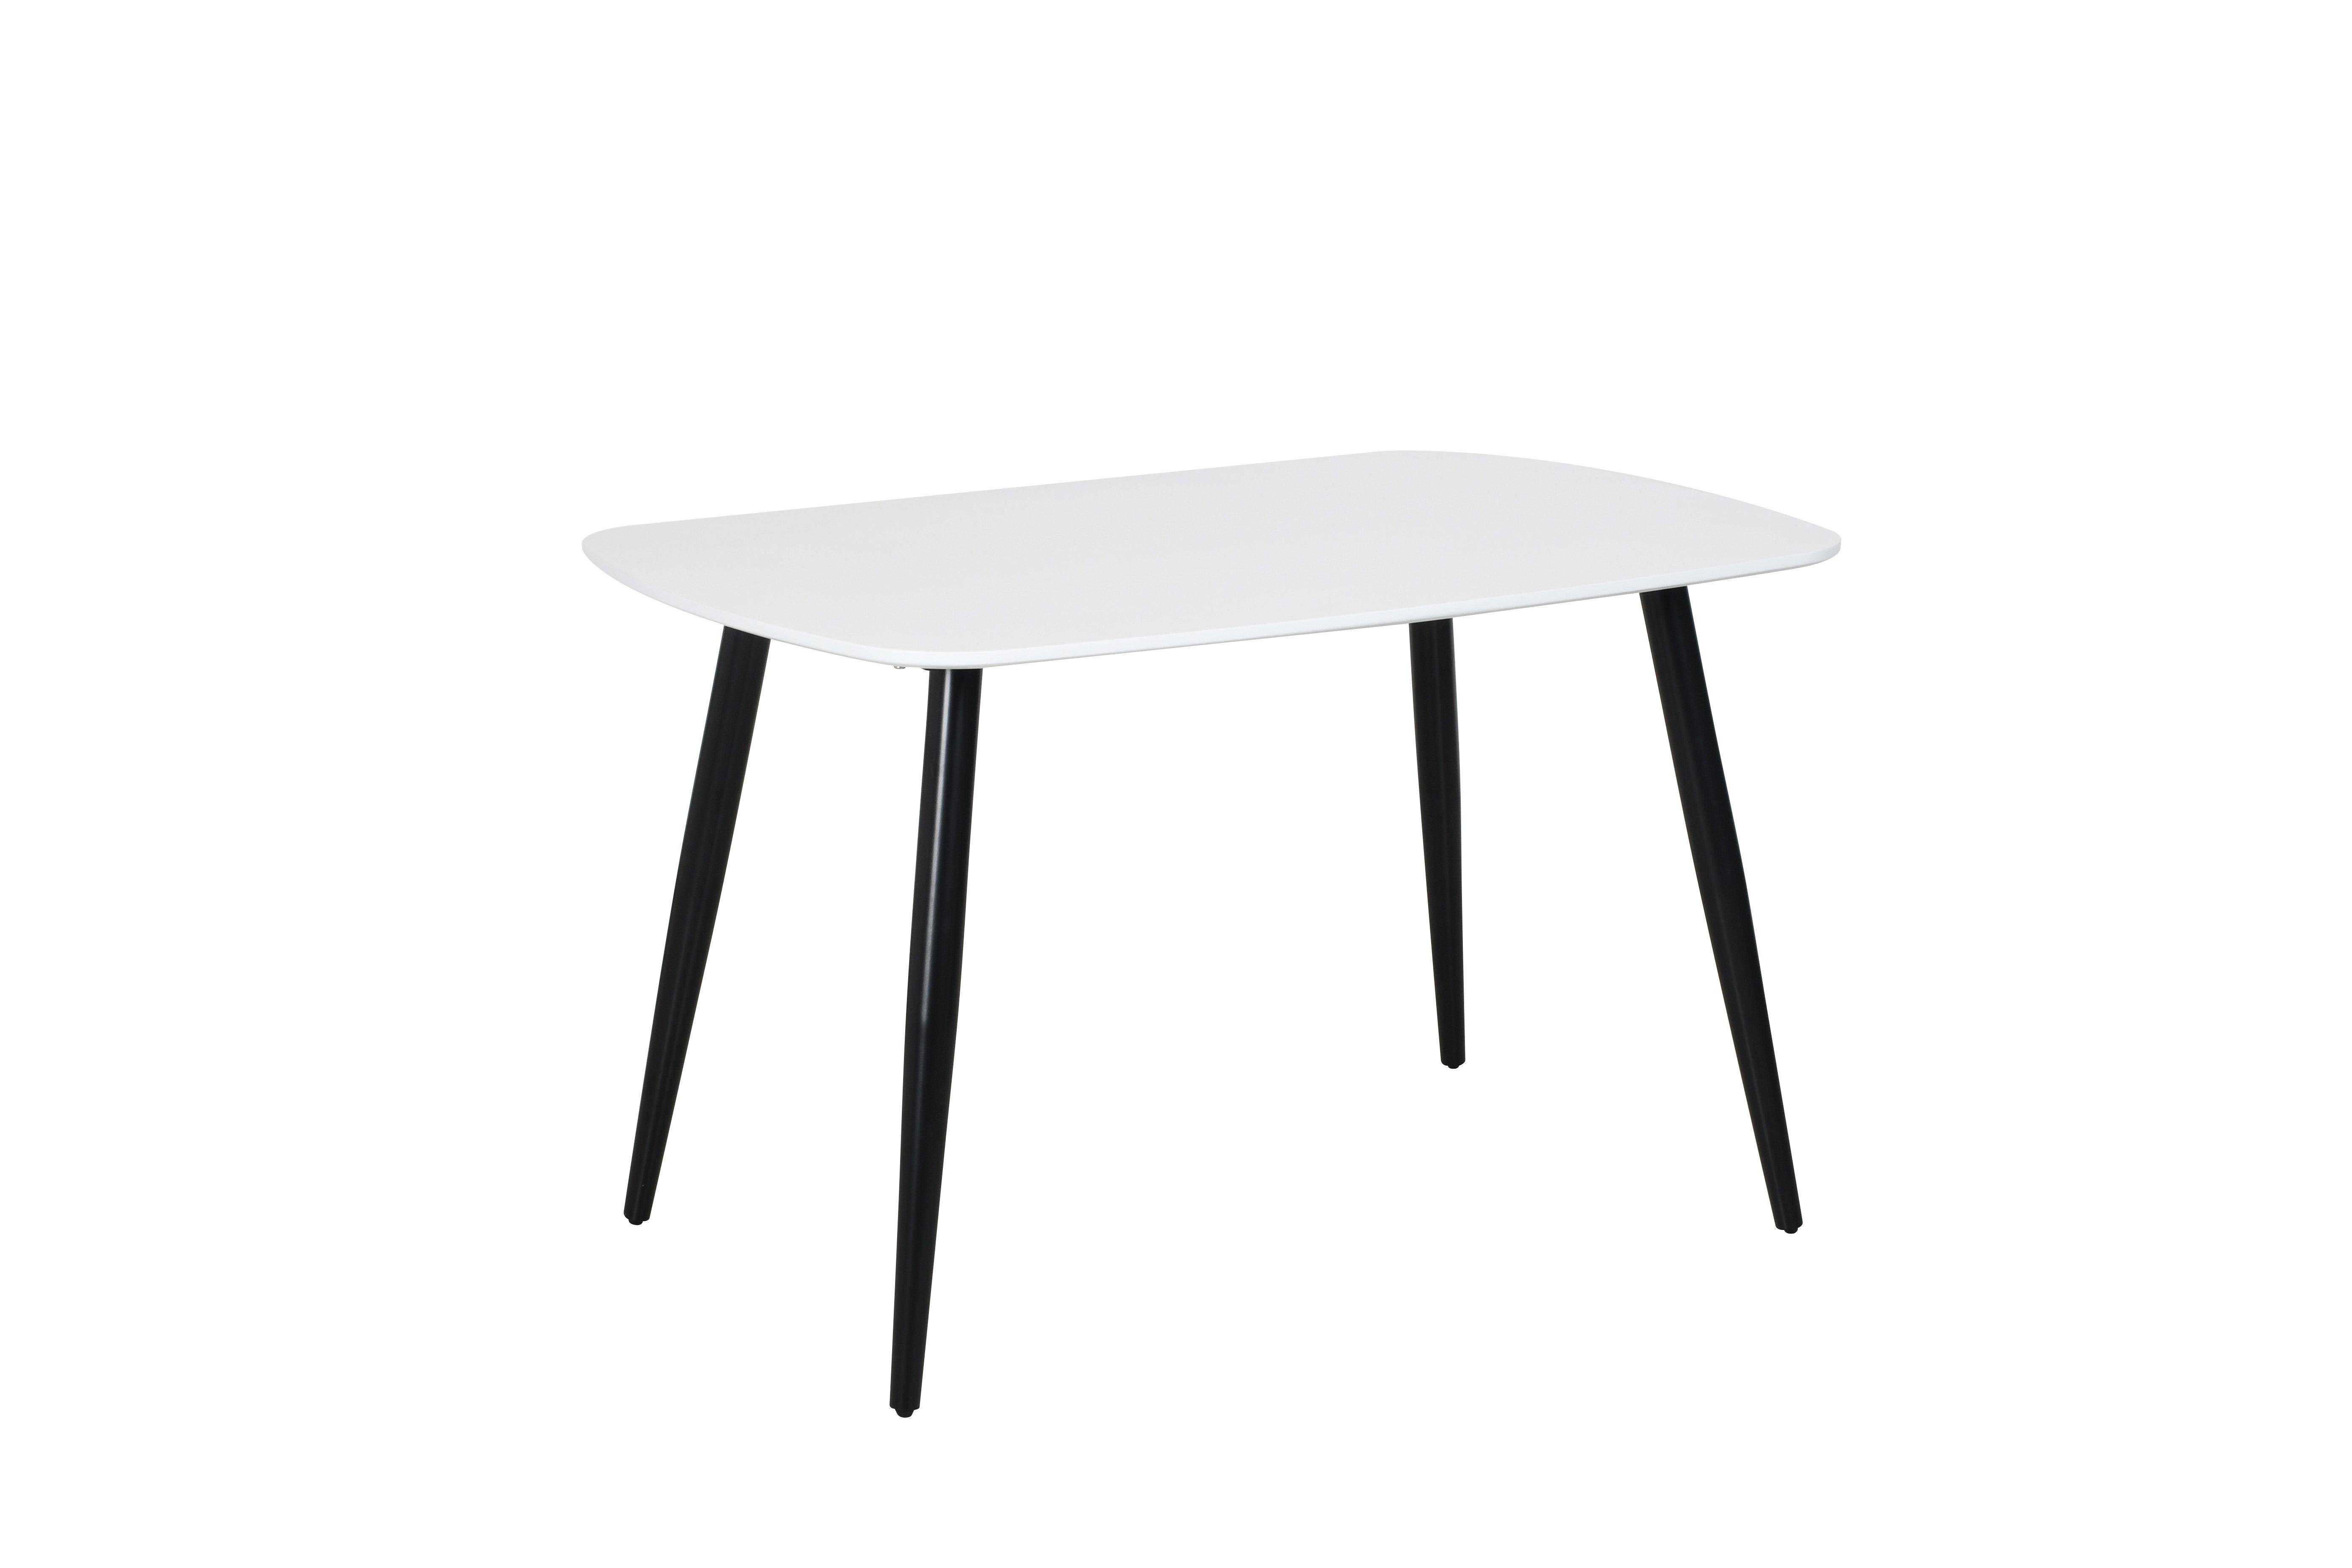 Aspen Rectangular Dining Table With Black Tapered Legs